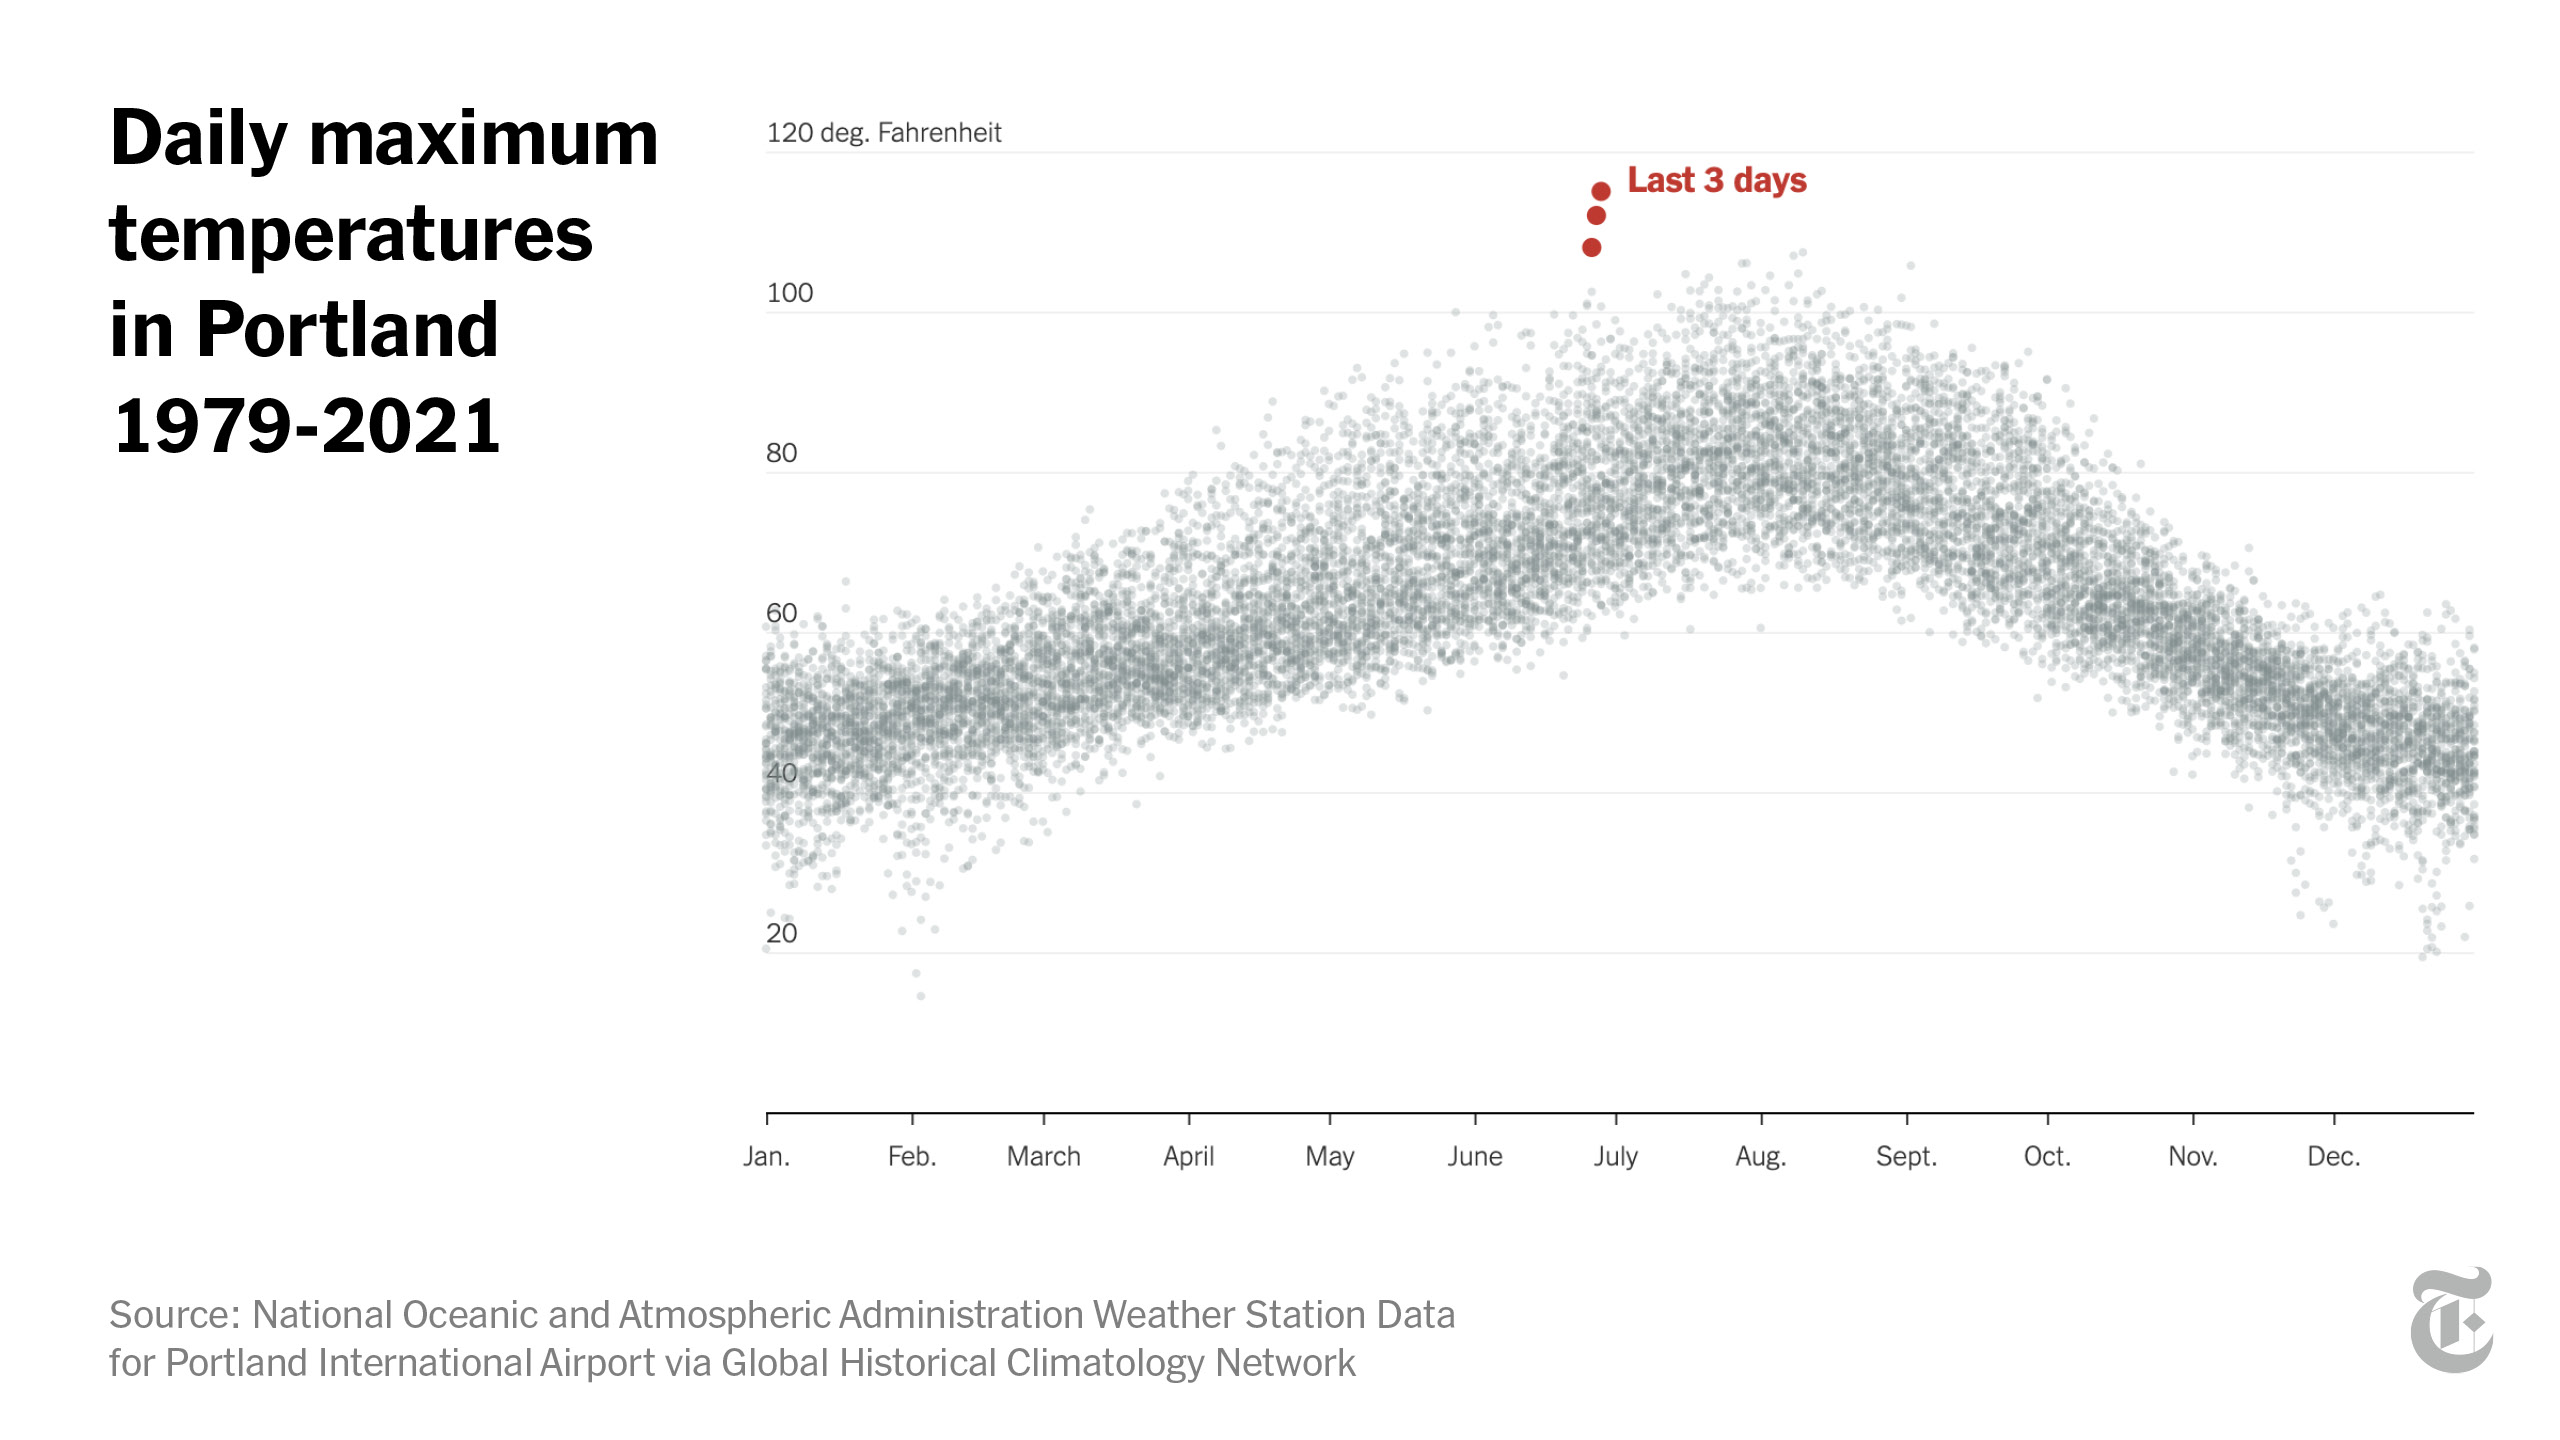 Temperature outliers in Portland